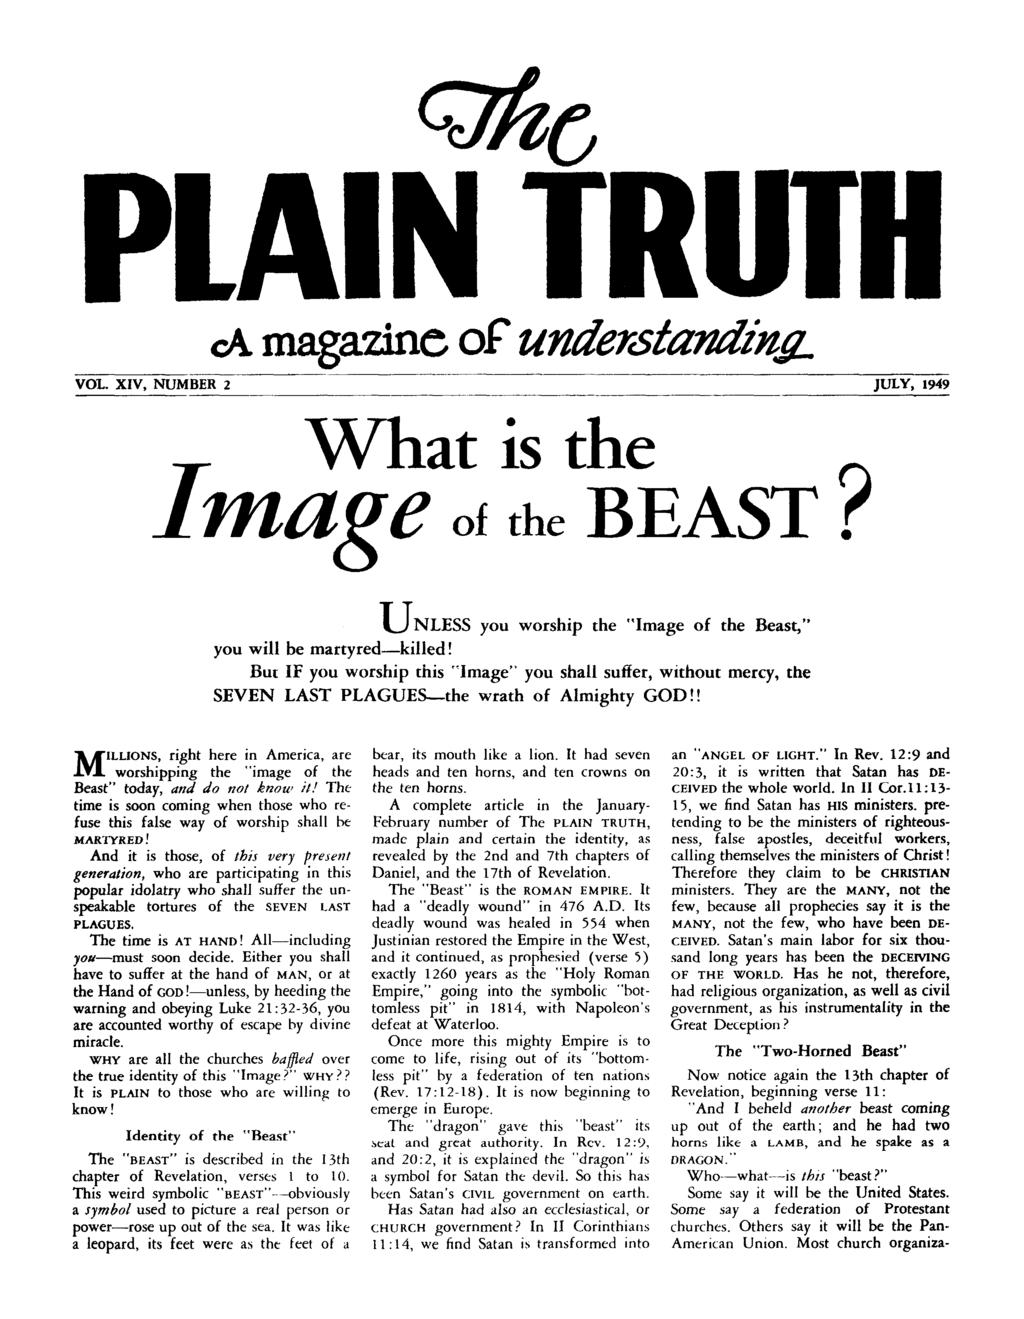 PLAl me N TRUTH VOL. XIV, NUMBER 2 JULY, 1949 What is the Image of the BEAST? UNLESS you worship the Image of the Beast, you will be martyred-killed!